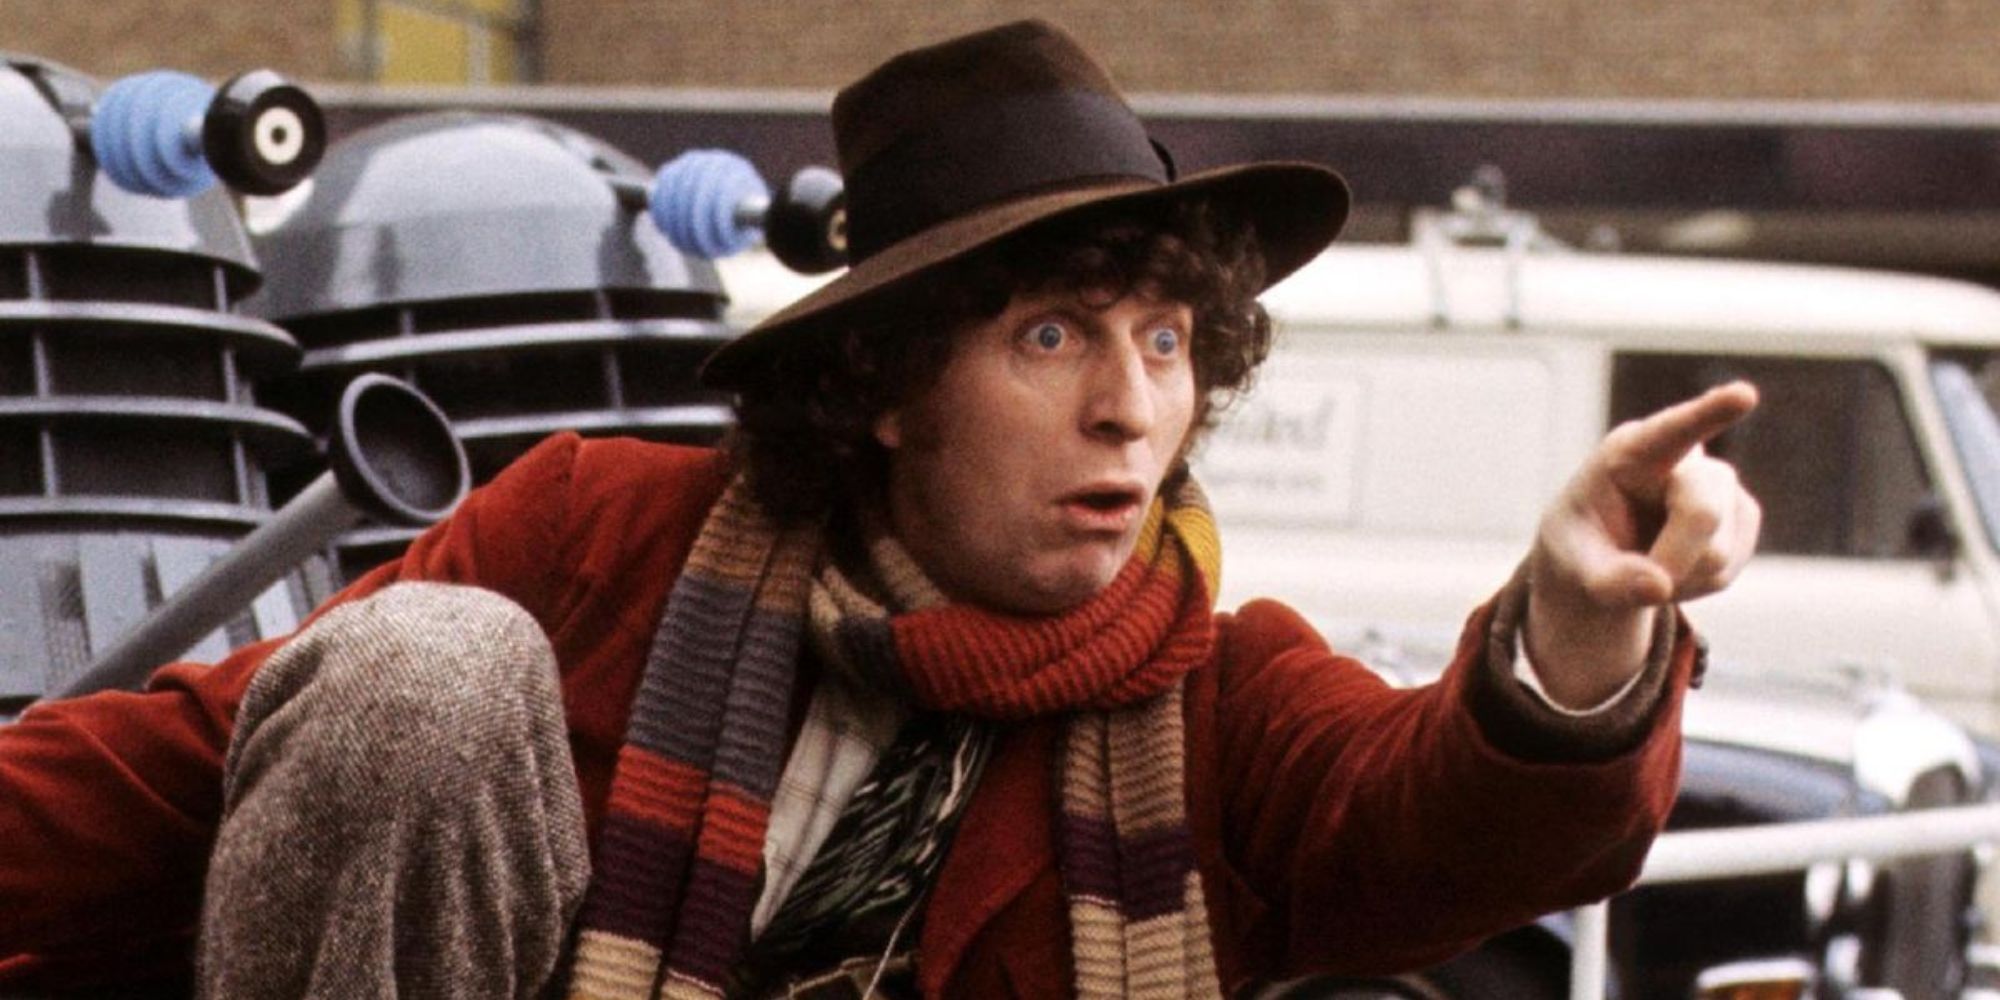 Tom Baker as the Fourth Doctor pointing while surrounded by Daleks